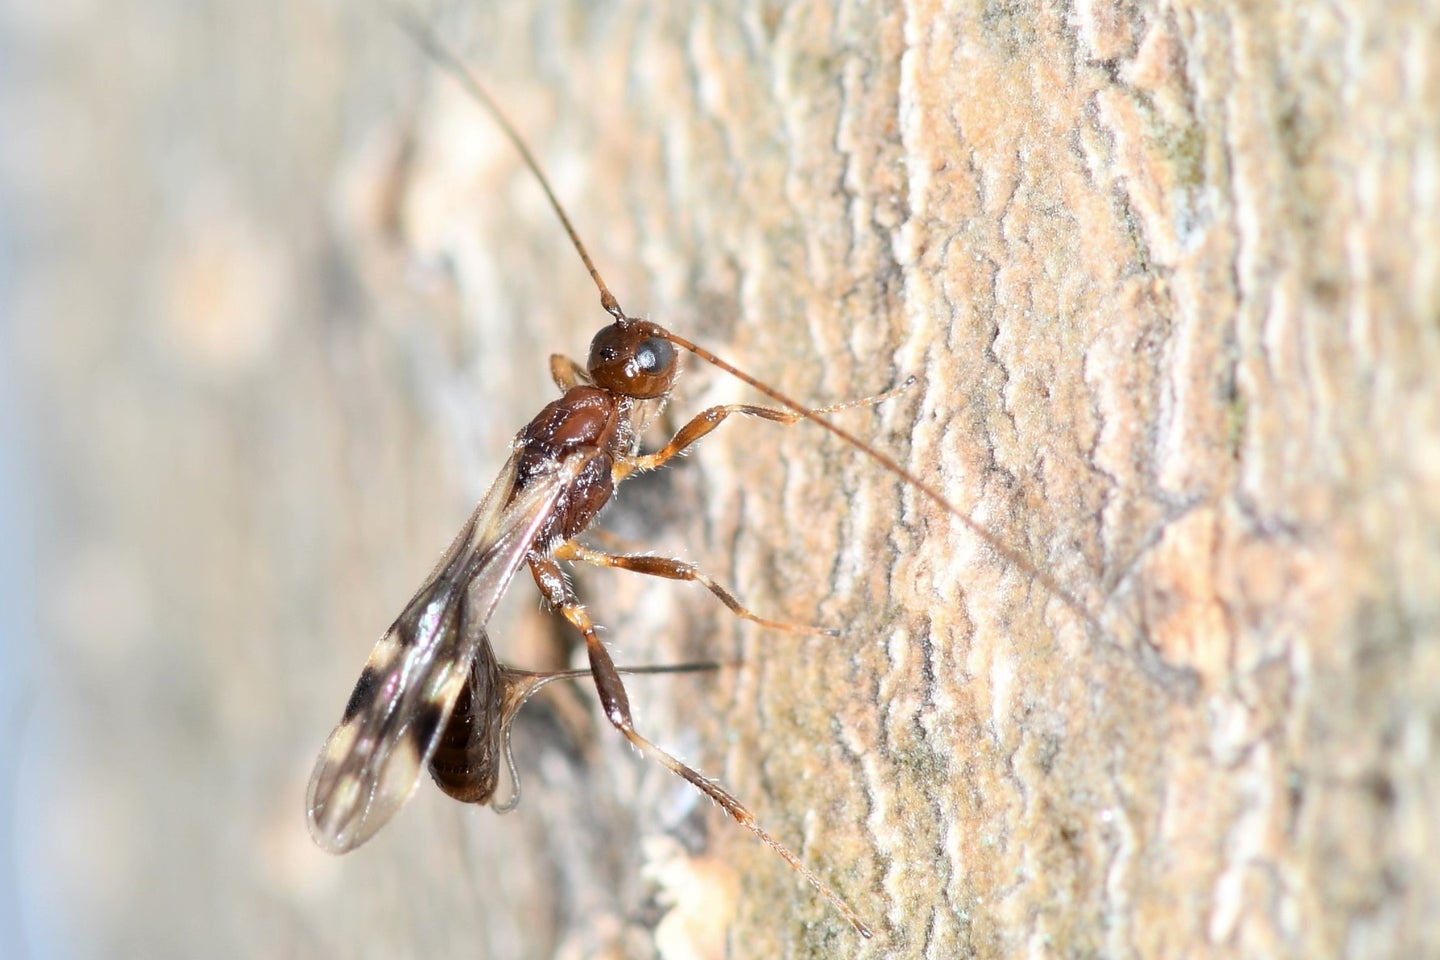 A brown wasp with long antennae on a tree trunk.